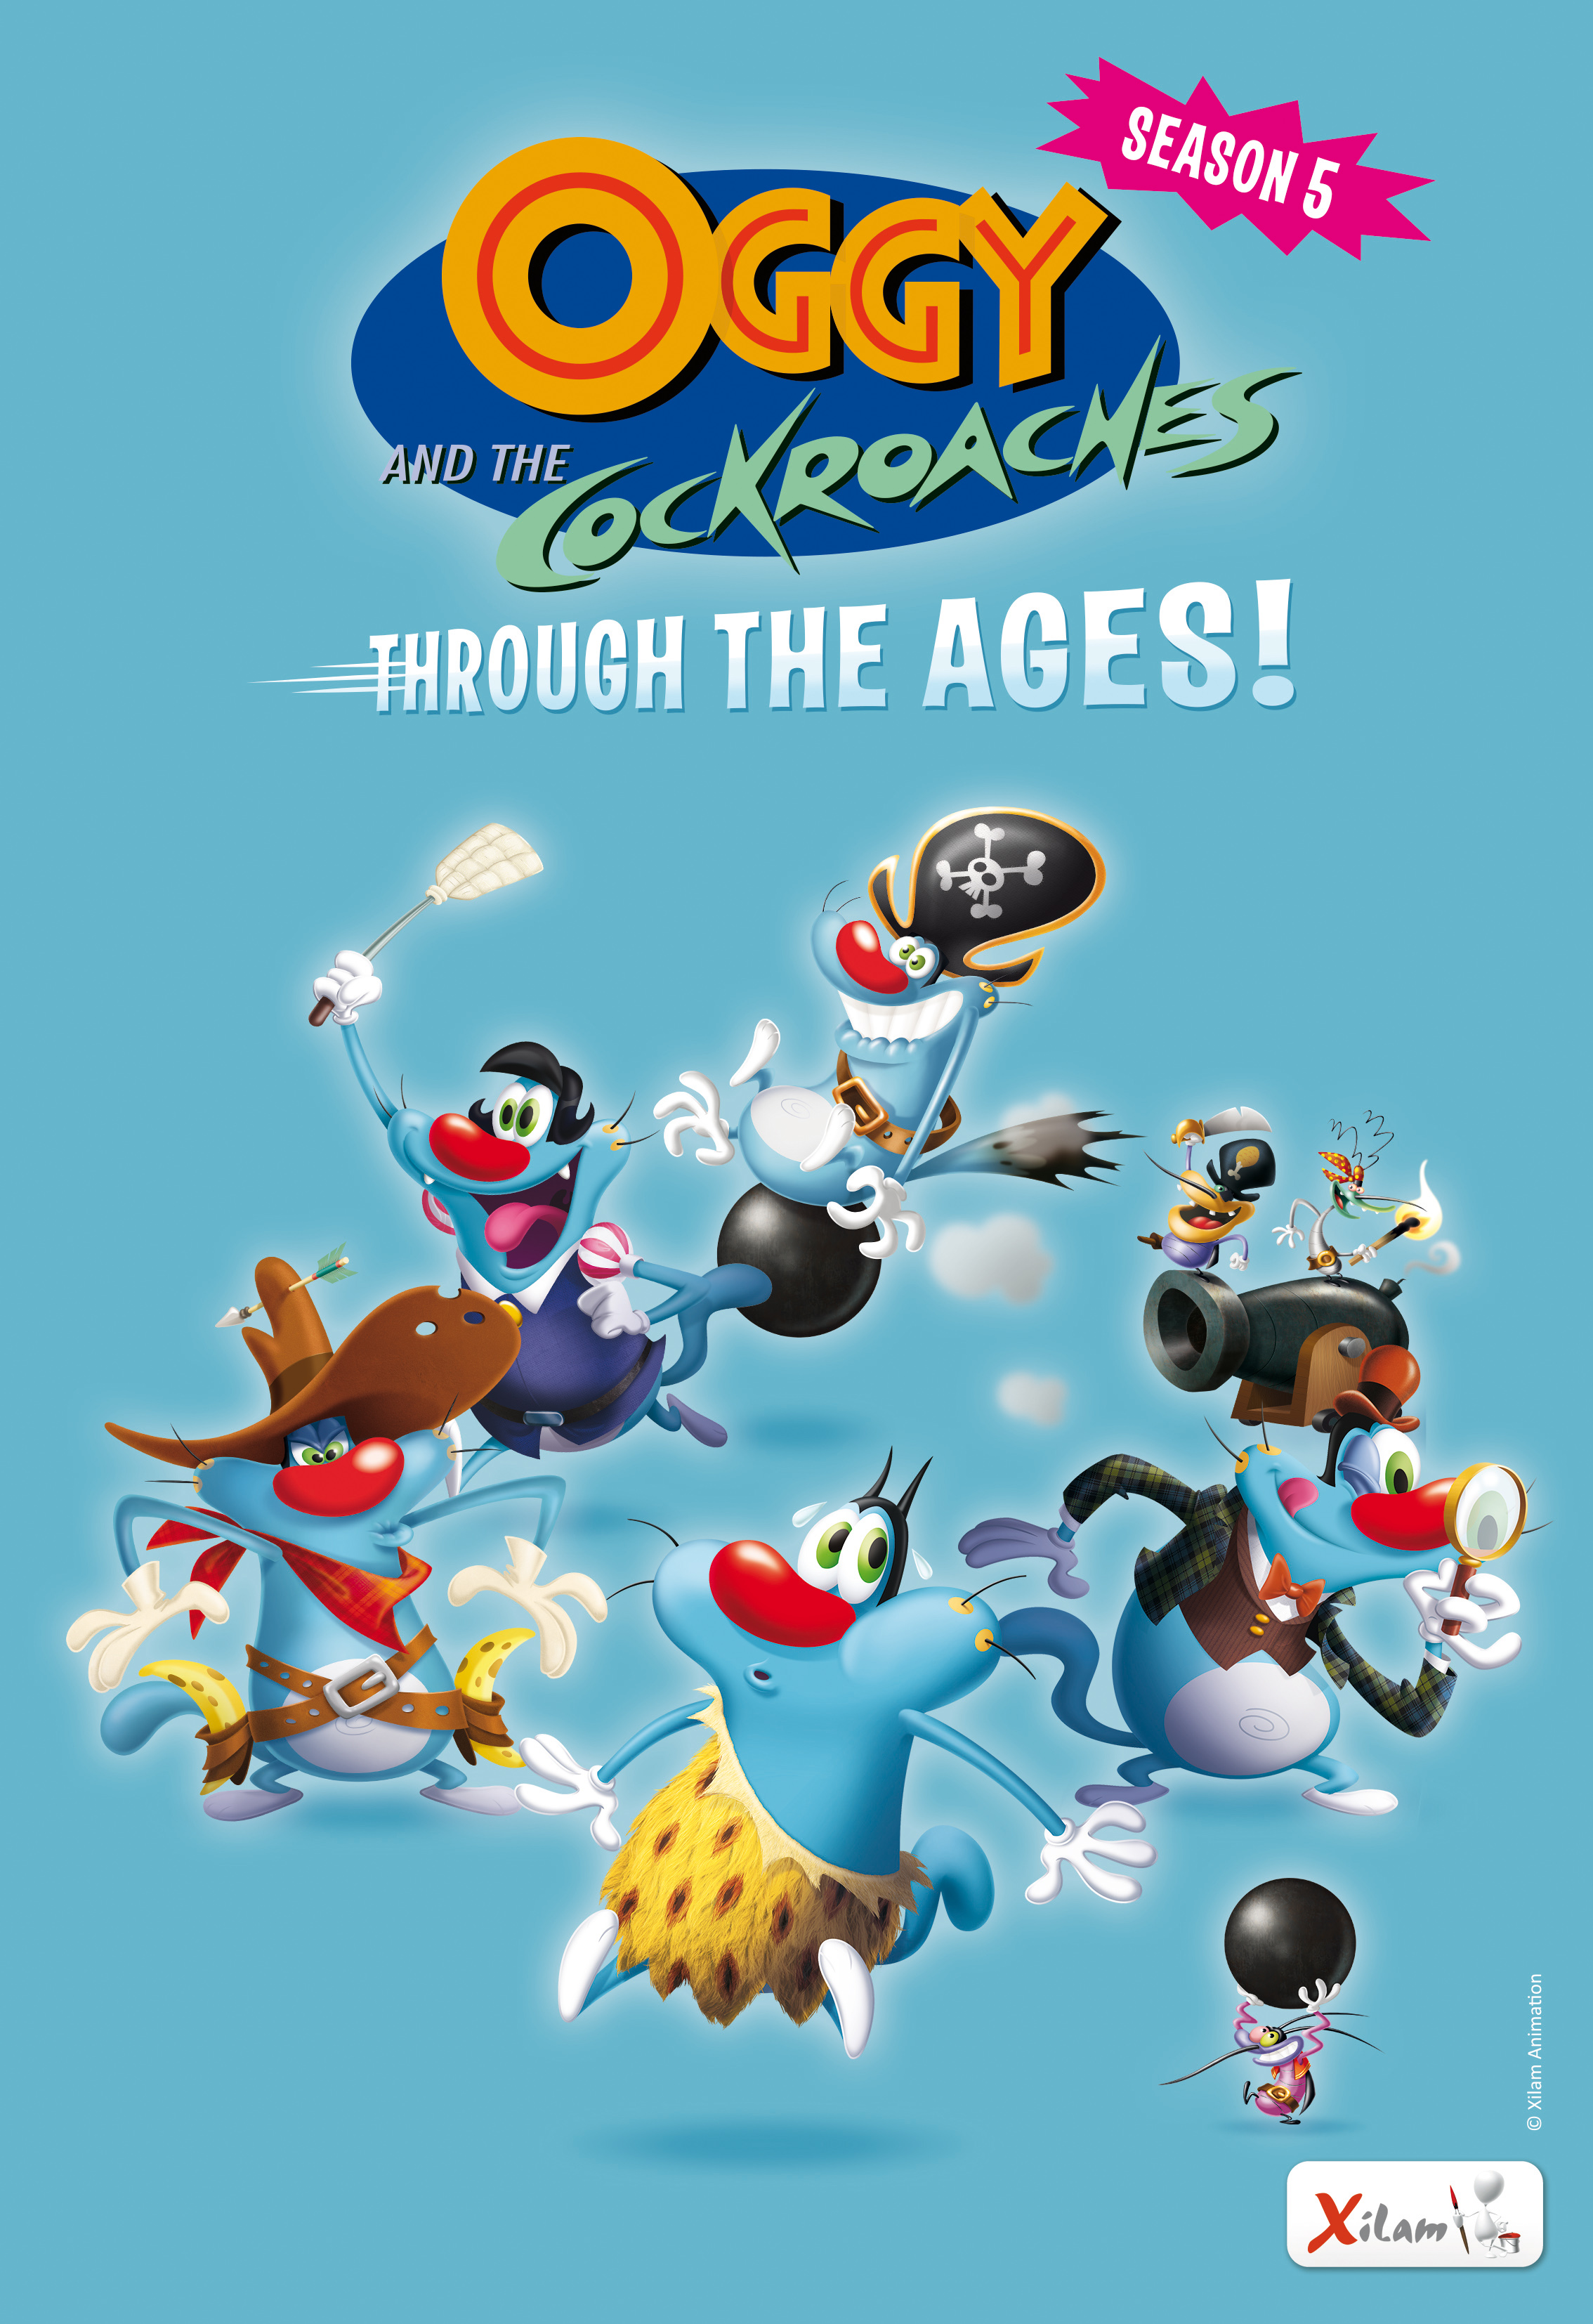 oggy and the cockroaches characters